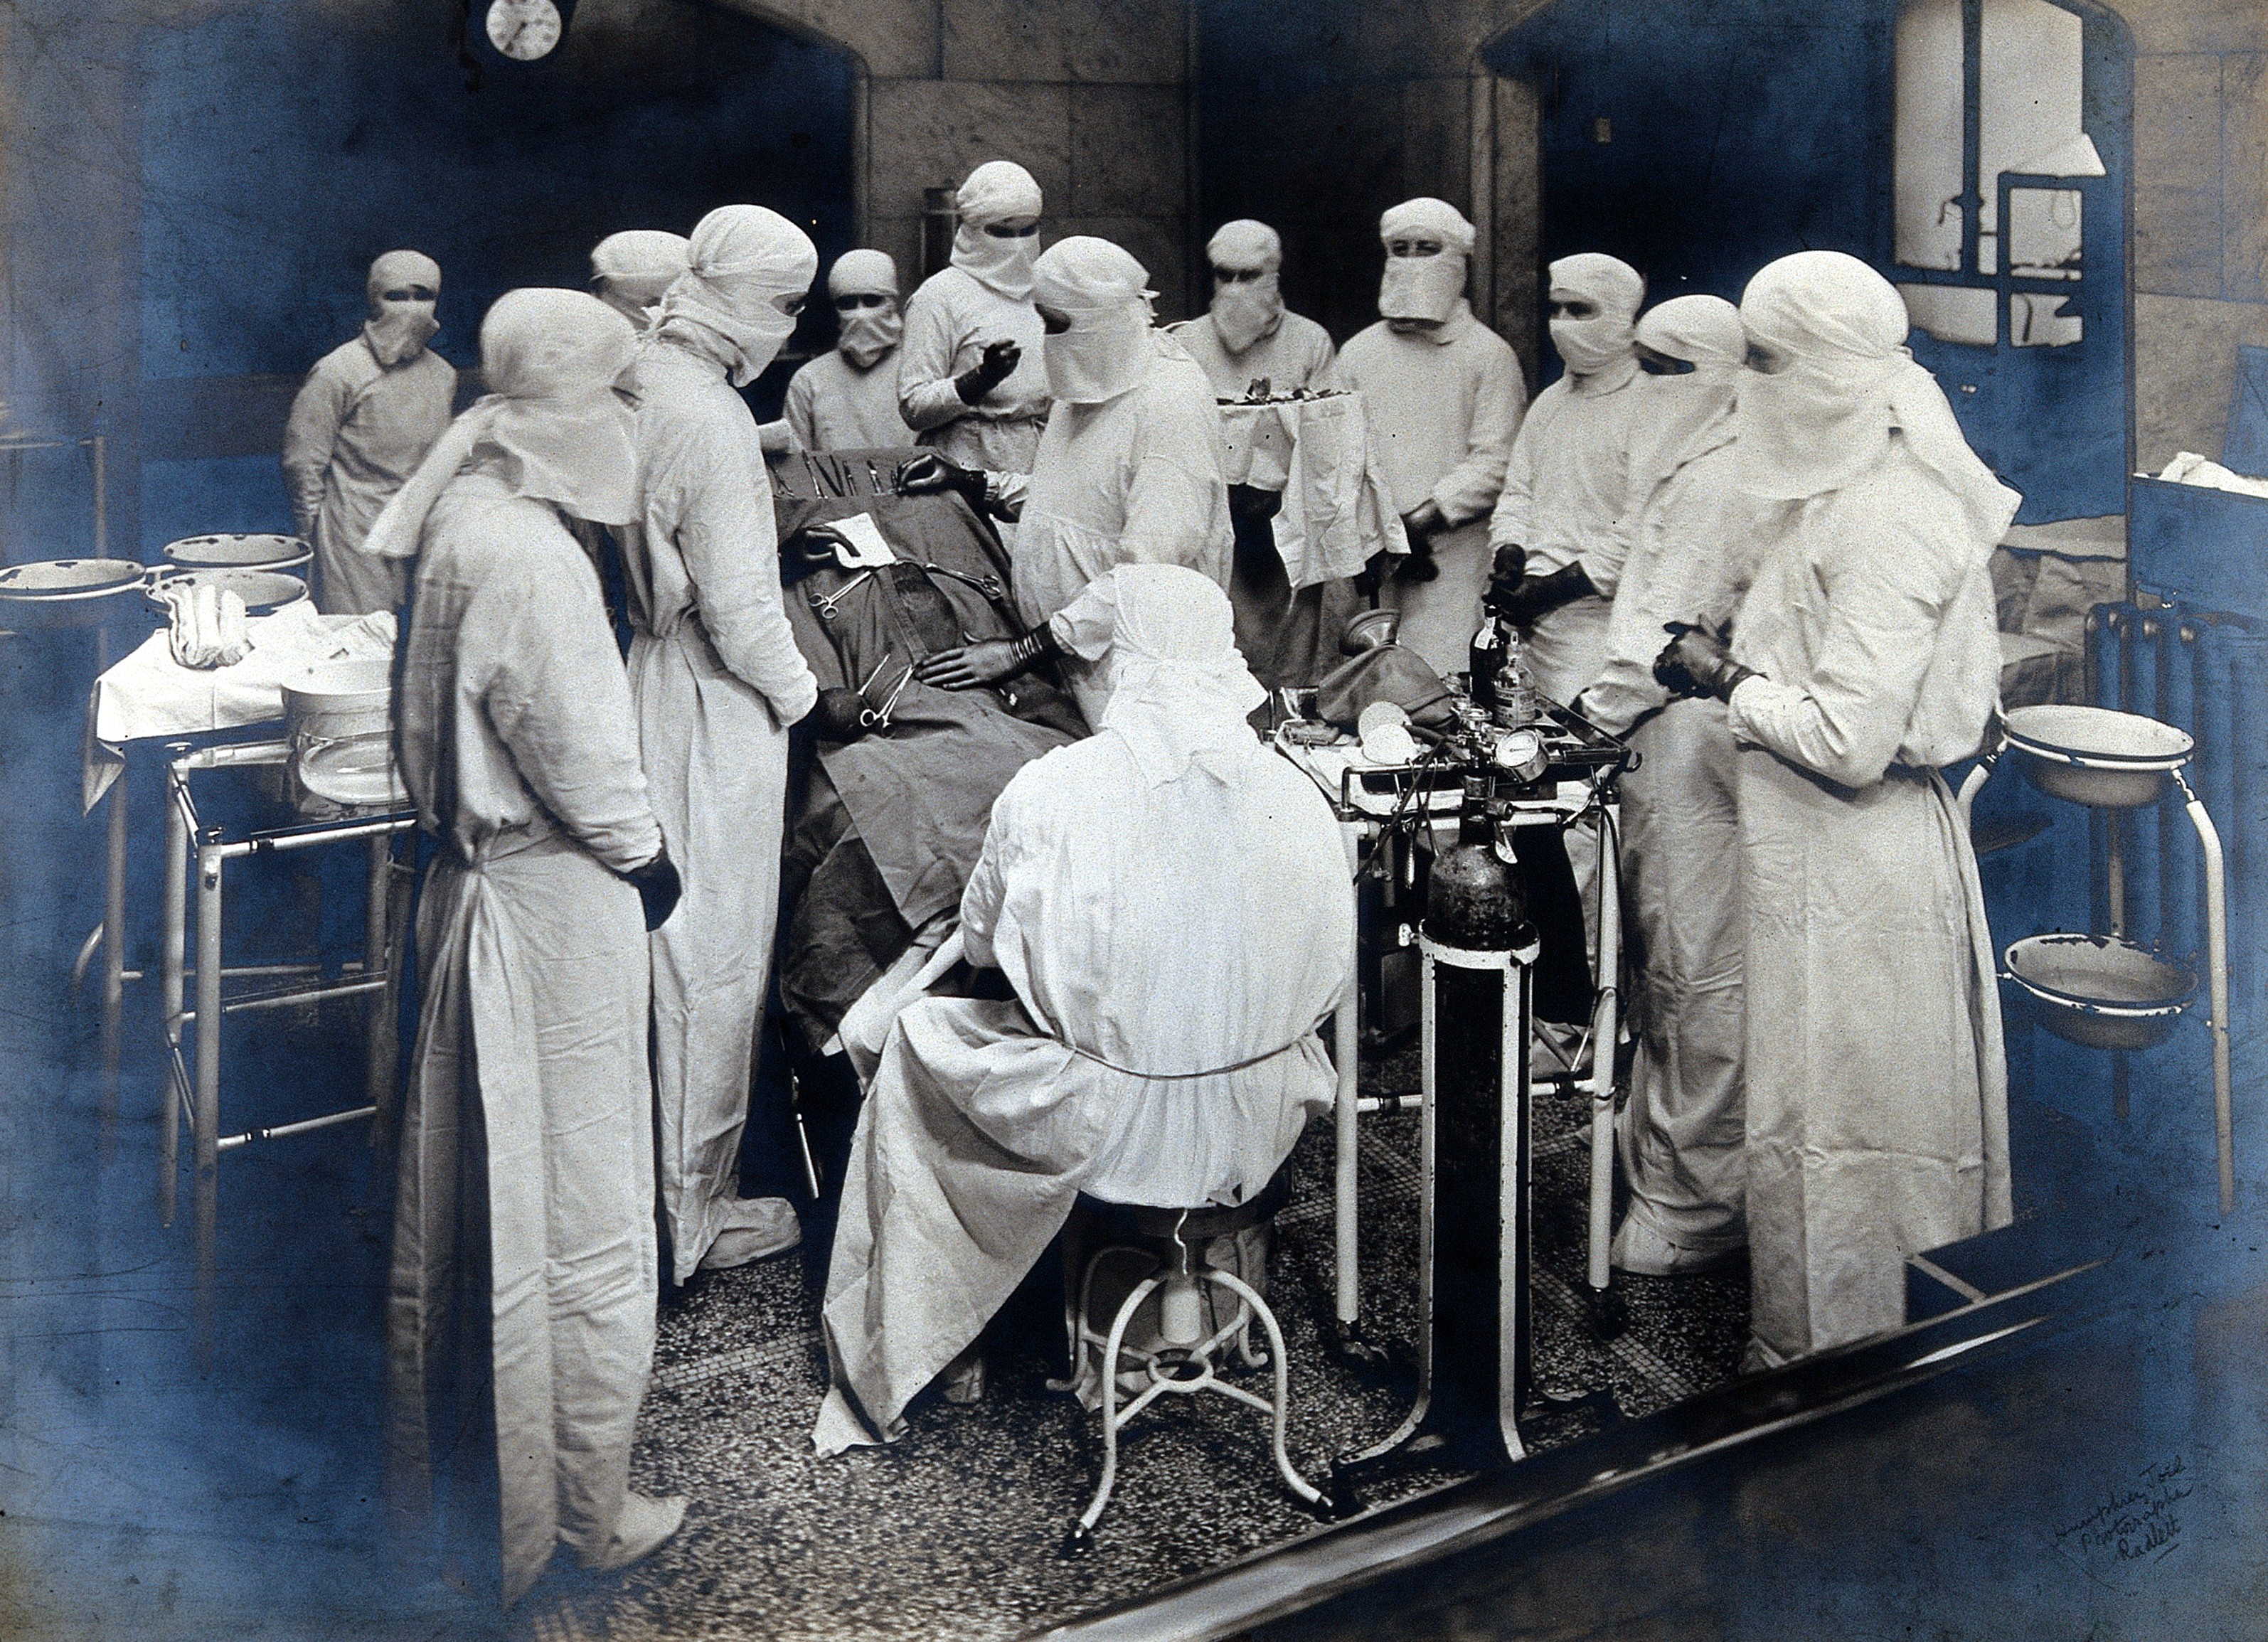 Surgical operation at Middlesex Hospital. Photograph by Hump Wellcome V0028640